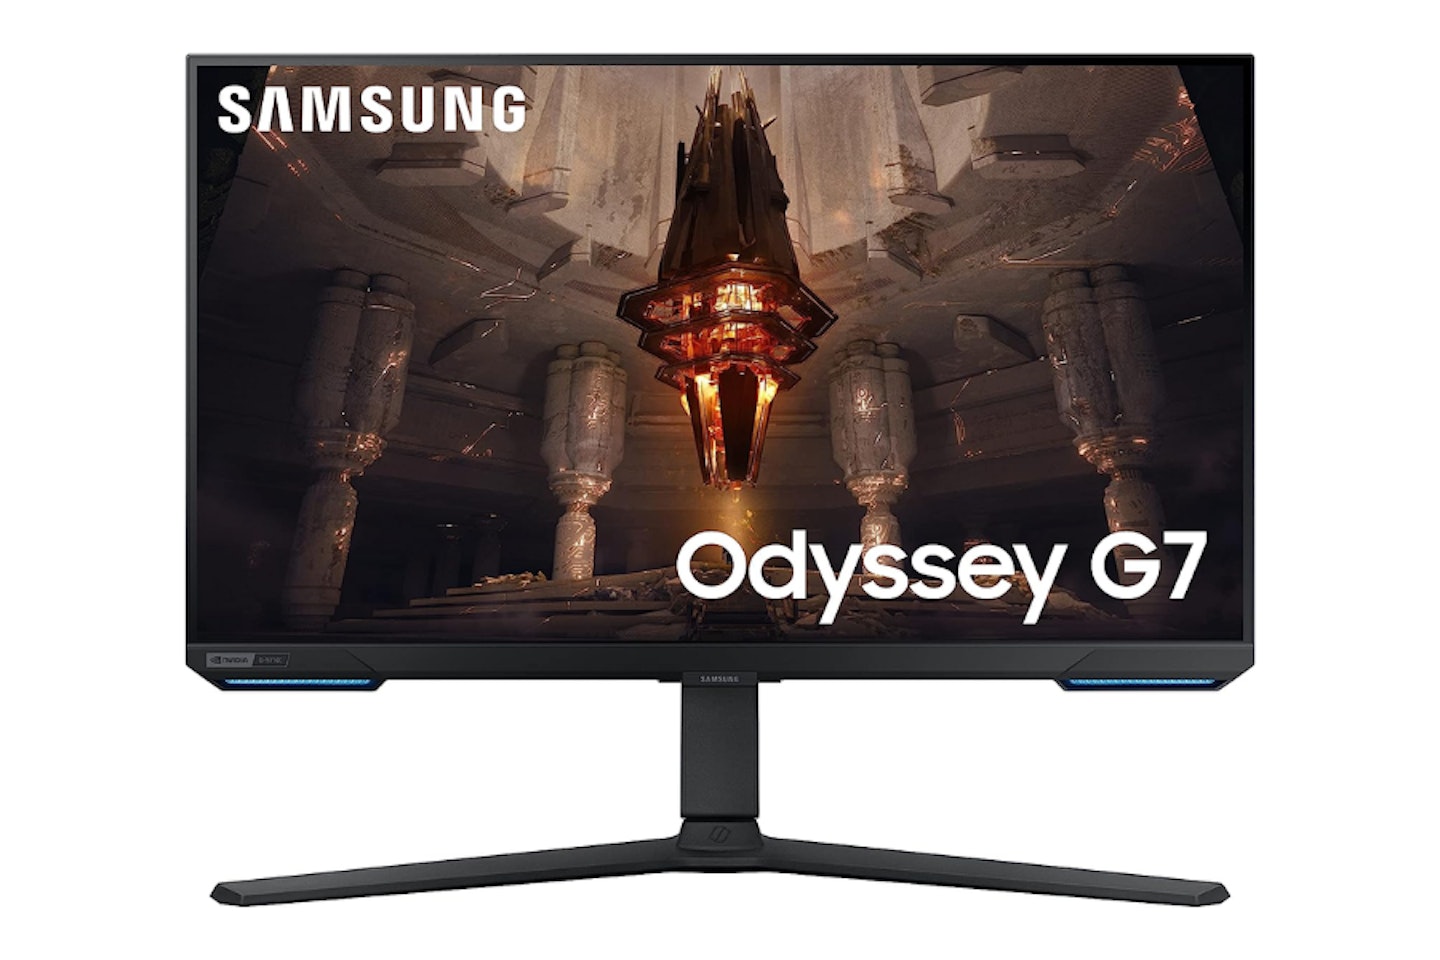 Samsung Odyssey G7 28” - one of the Best monitors for Xbox Series X in 2023